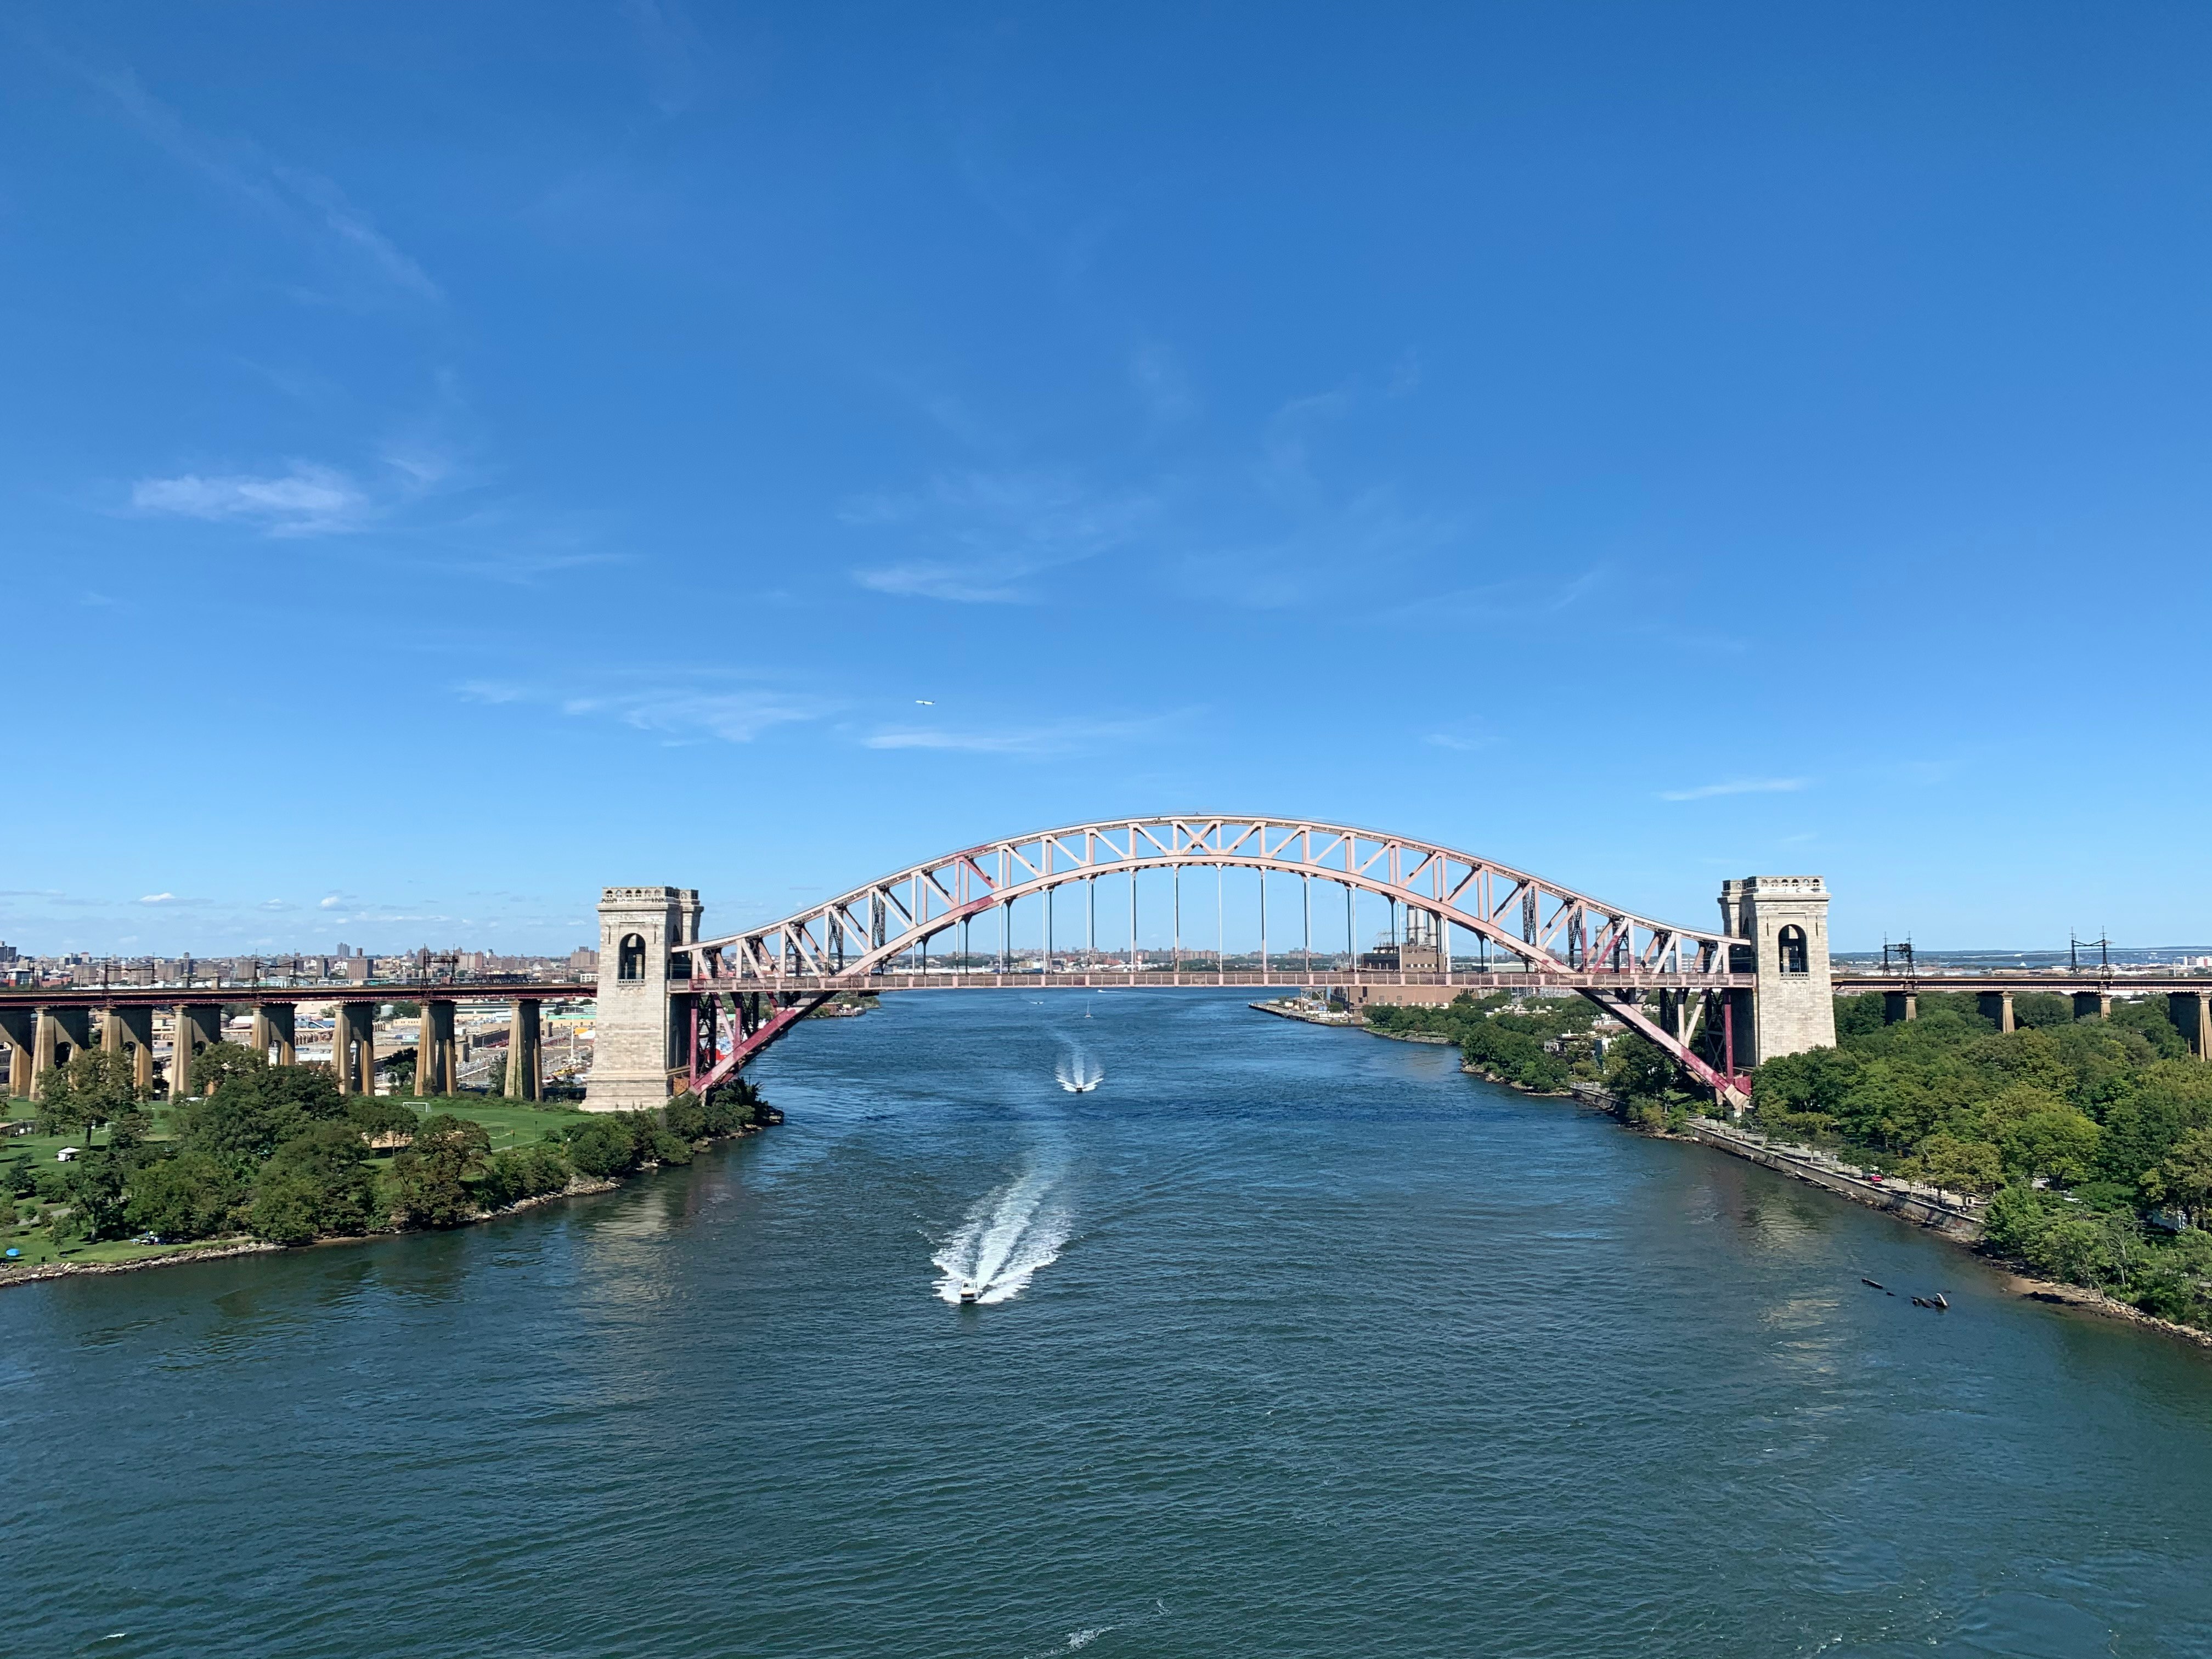 Hell Gate Bridge over the East River, between Randall’s Island and Astoria, New York